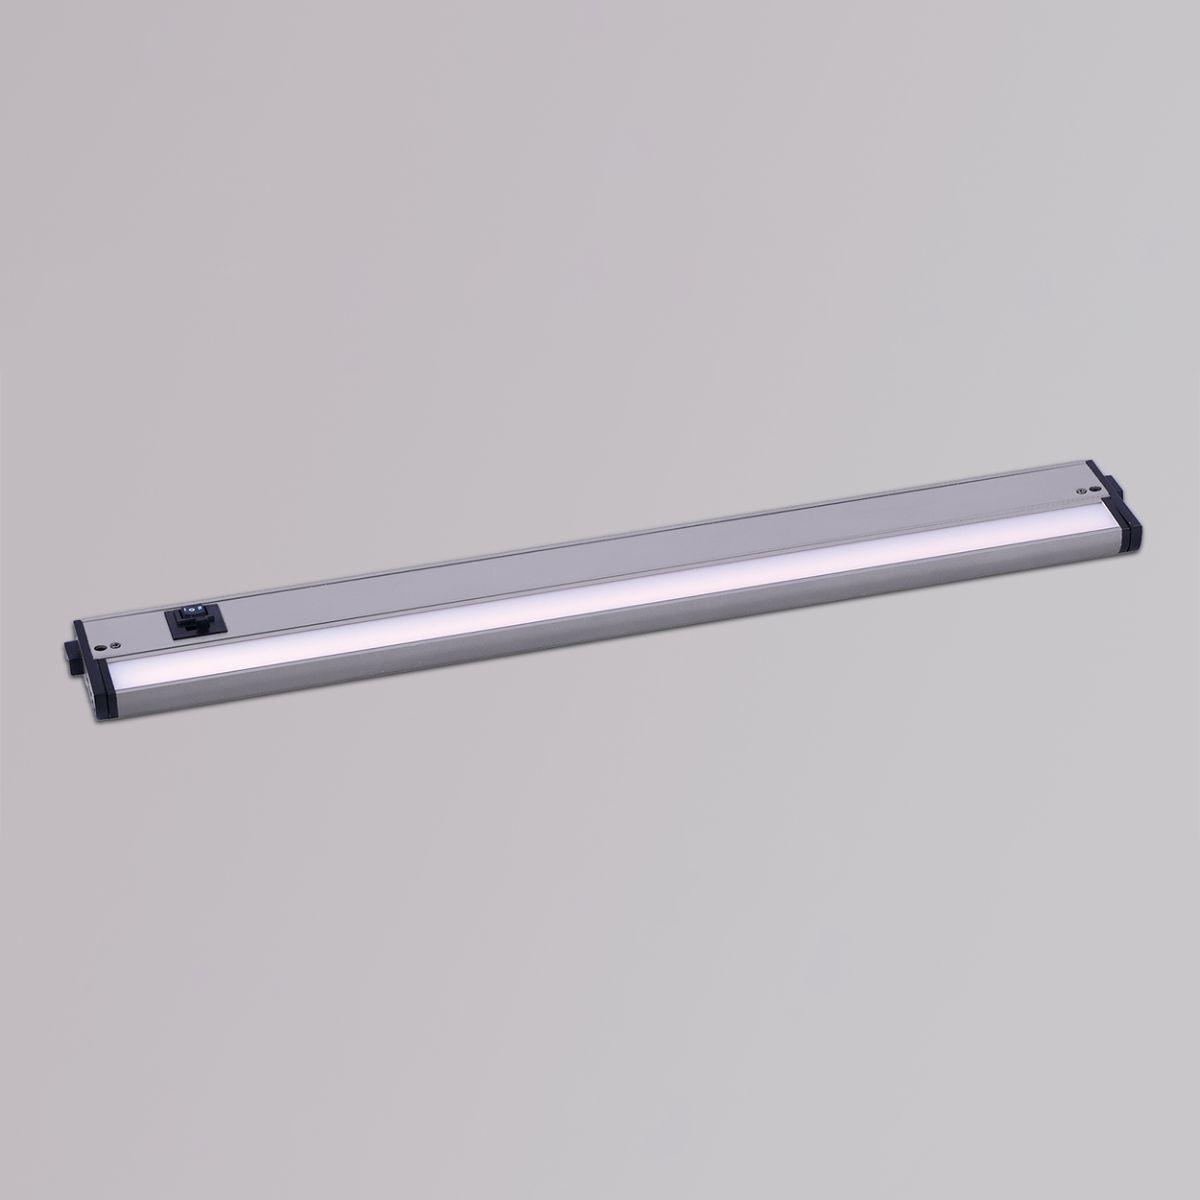 CounterMax 5K 24 Inch Under Cabinet LED Light with Patent gimbals, 1560 Lumens, Linkable, CCT Selectable 2700K to 5000K, 120V